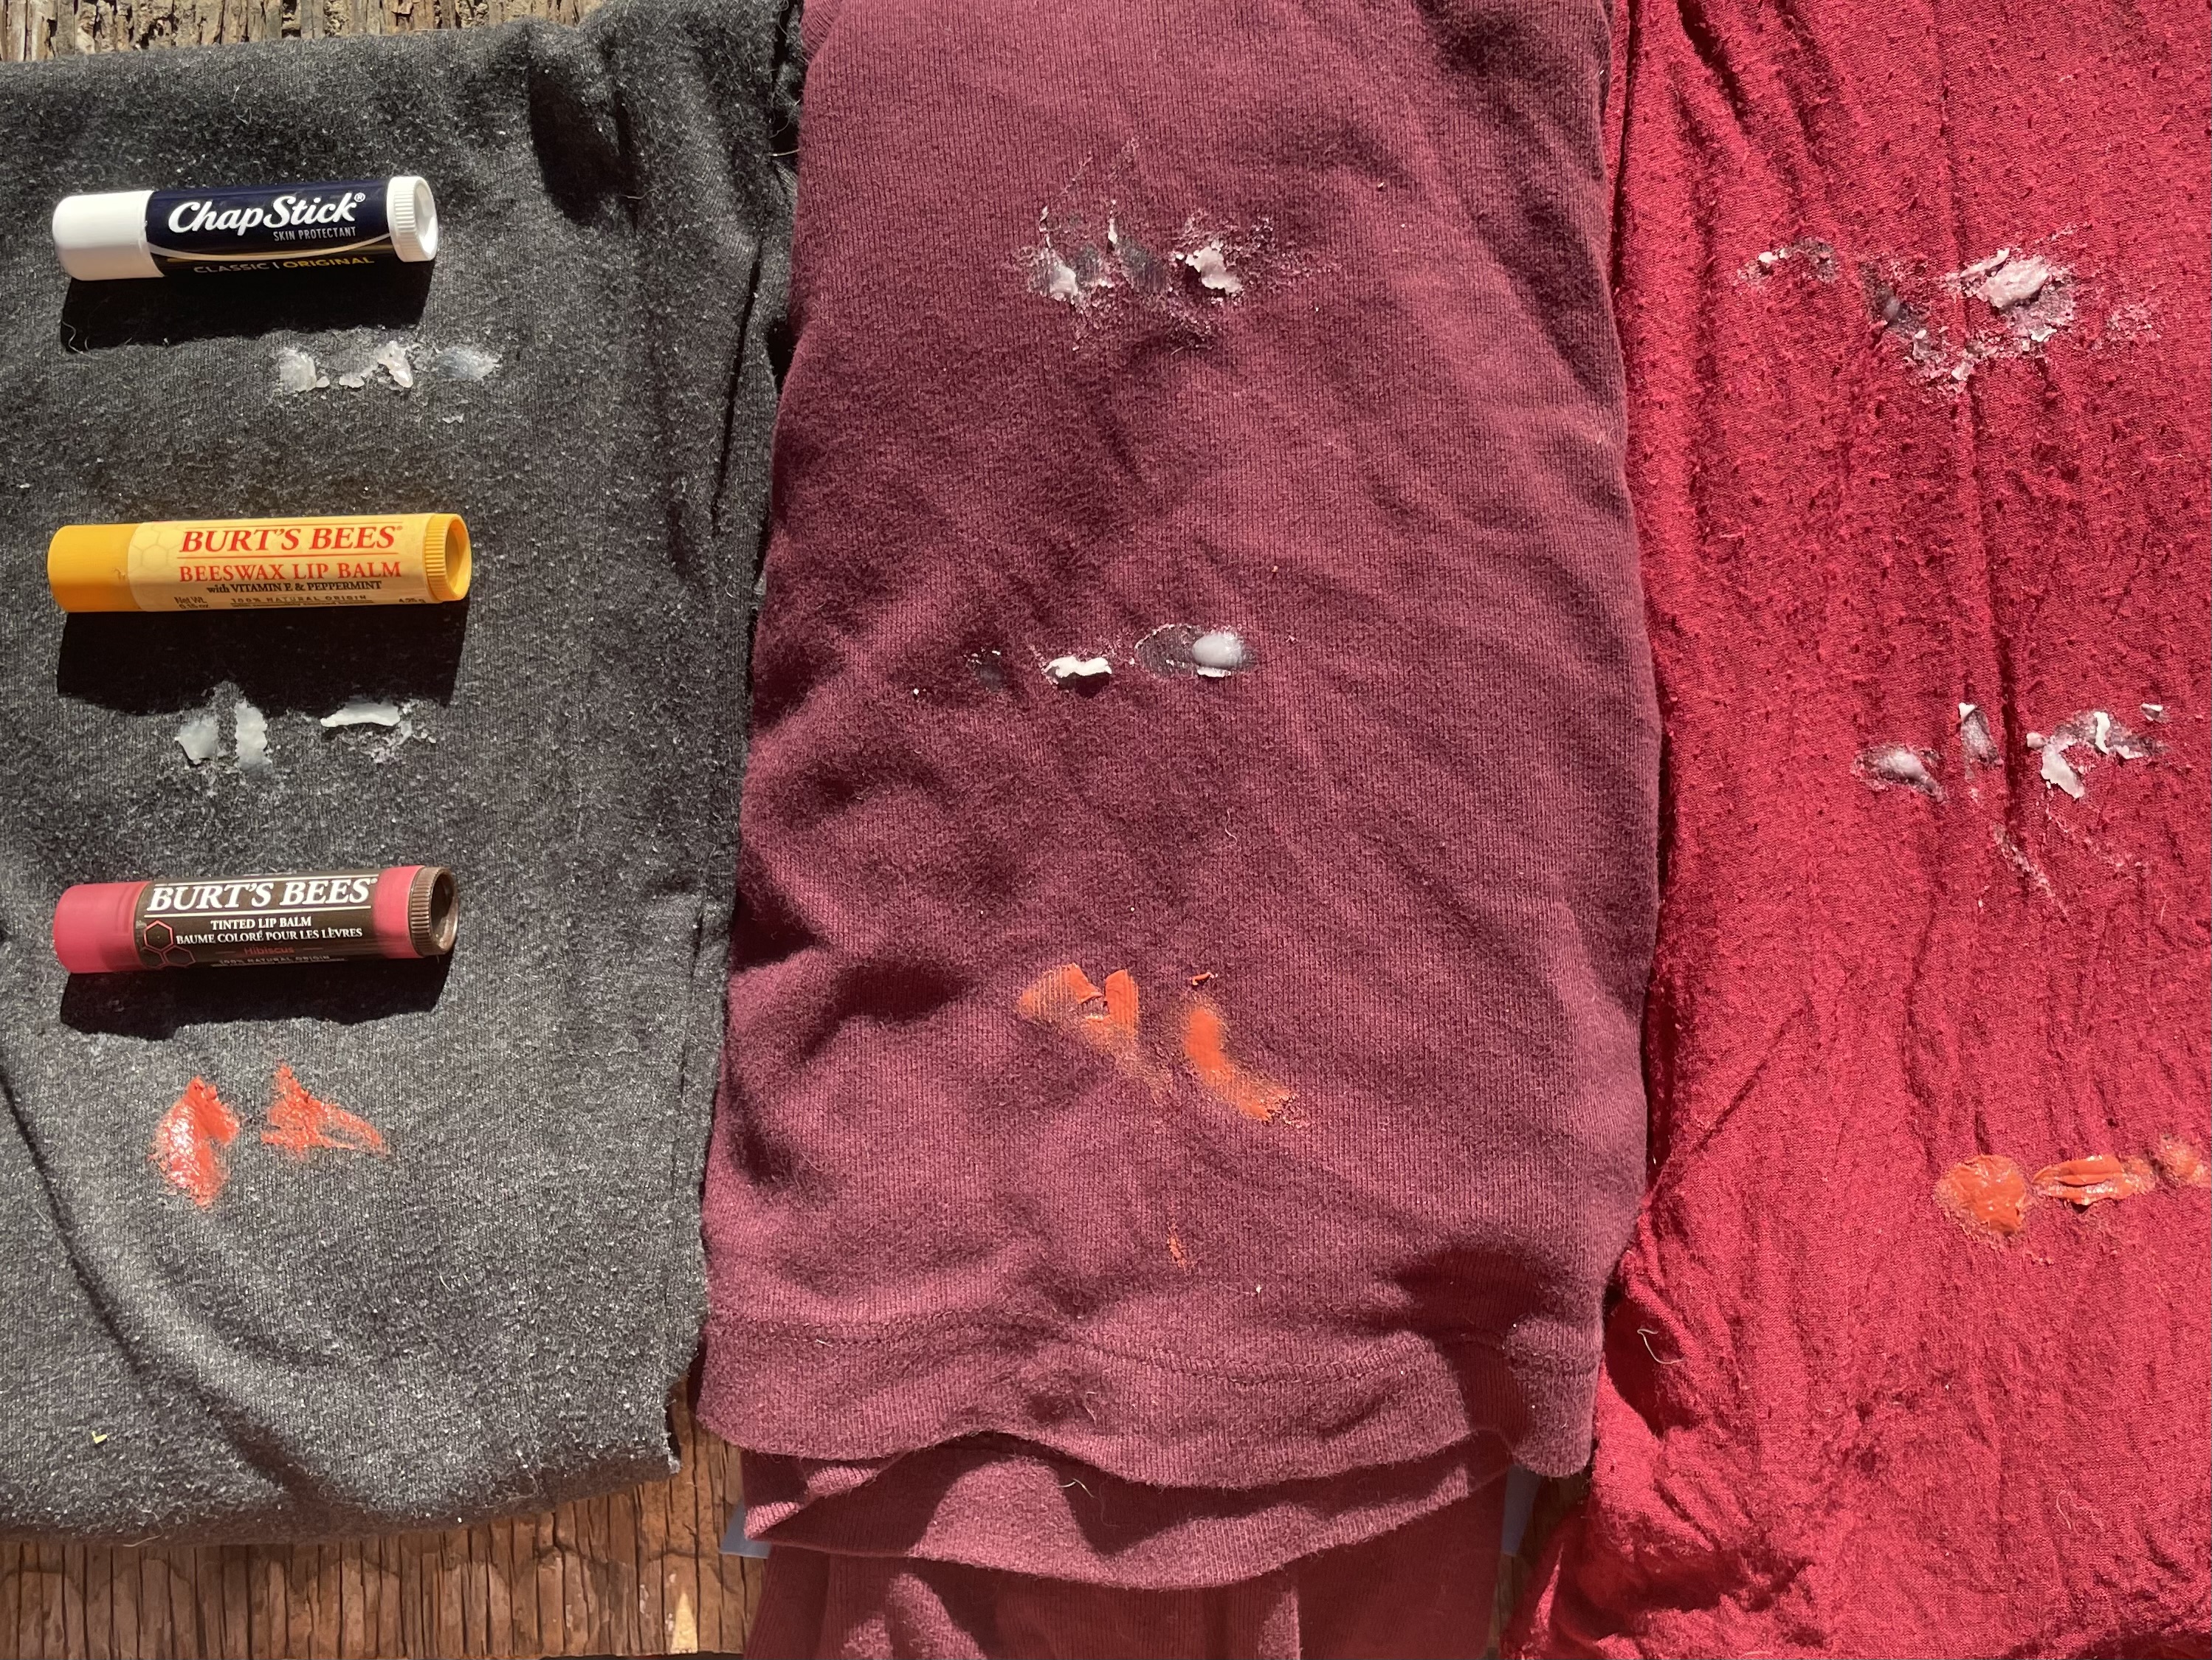 Three different shirts with chapstick stains